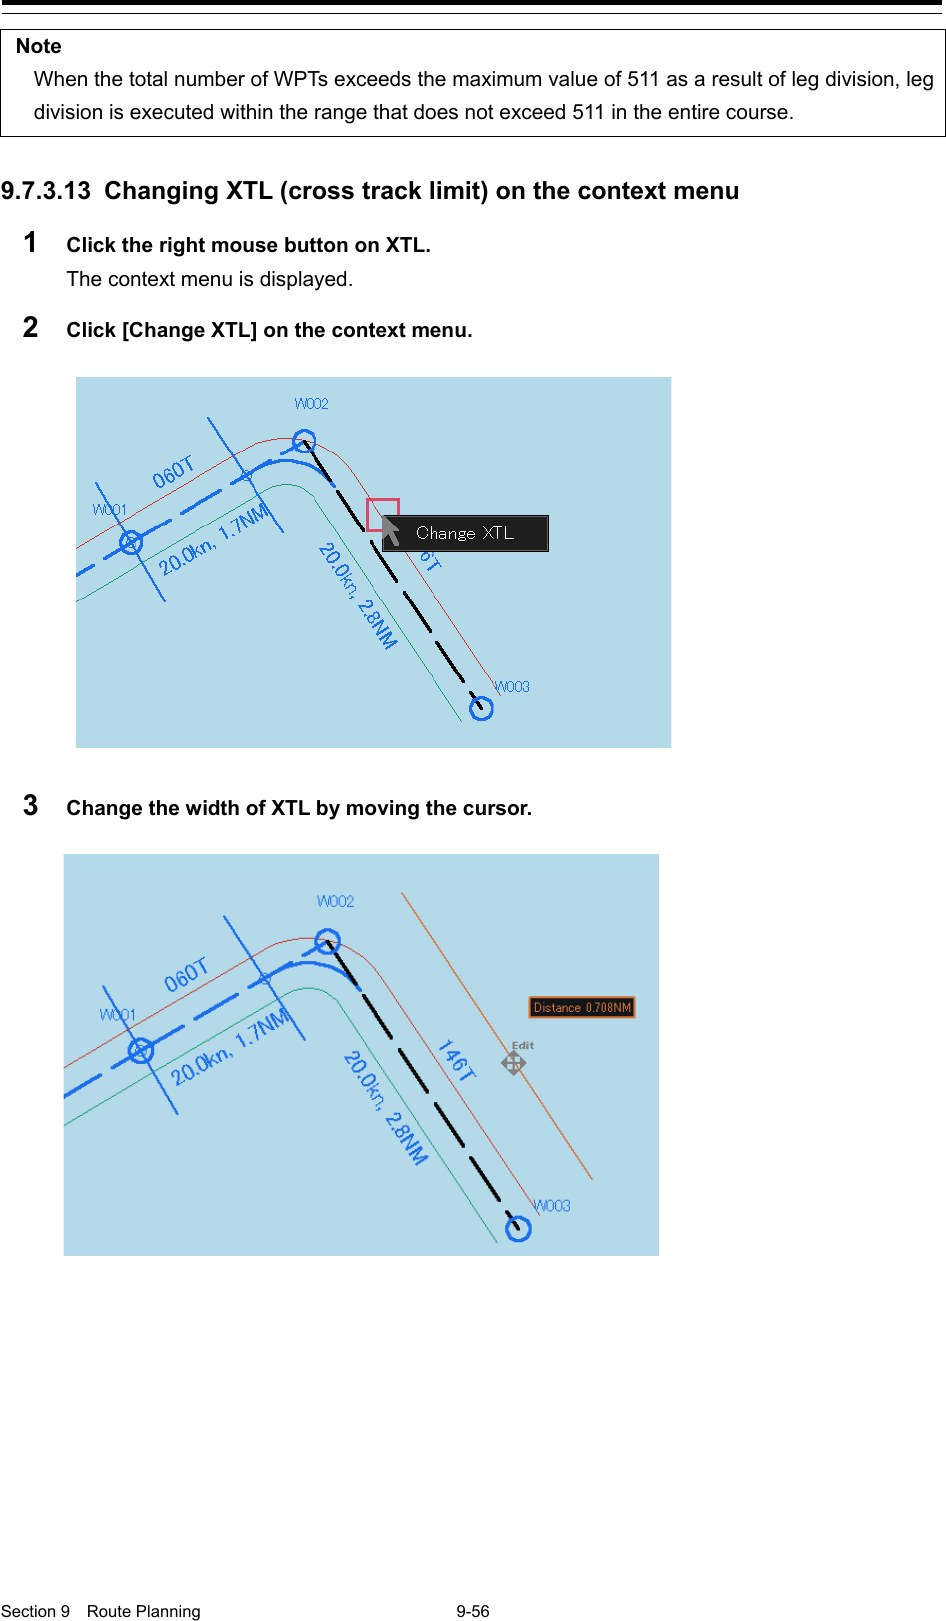  Section 9  Route Planning  9-56  Note When the total number of WPTs exceeds the maximum value of 511 as a result of leg division, leg division is executed within the range that does not exceed 511 in the entire course.  9.7.3.13 Changing XTL (cross track limit) on the context menu 1  Click the right mouse button on XTL. The context menu is displayed. 2  Click [Change XTL] on the context menu.   3  Change the width of XTL by moving the cursor.      